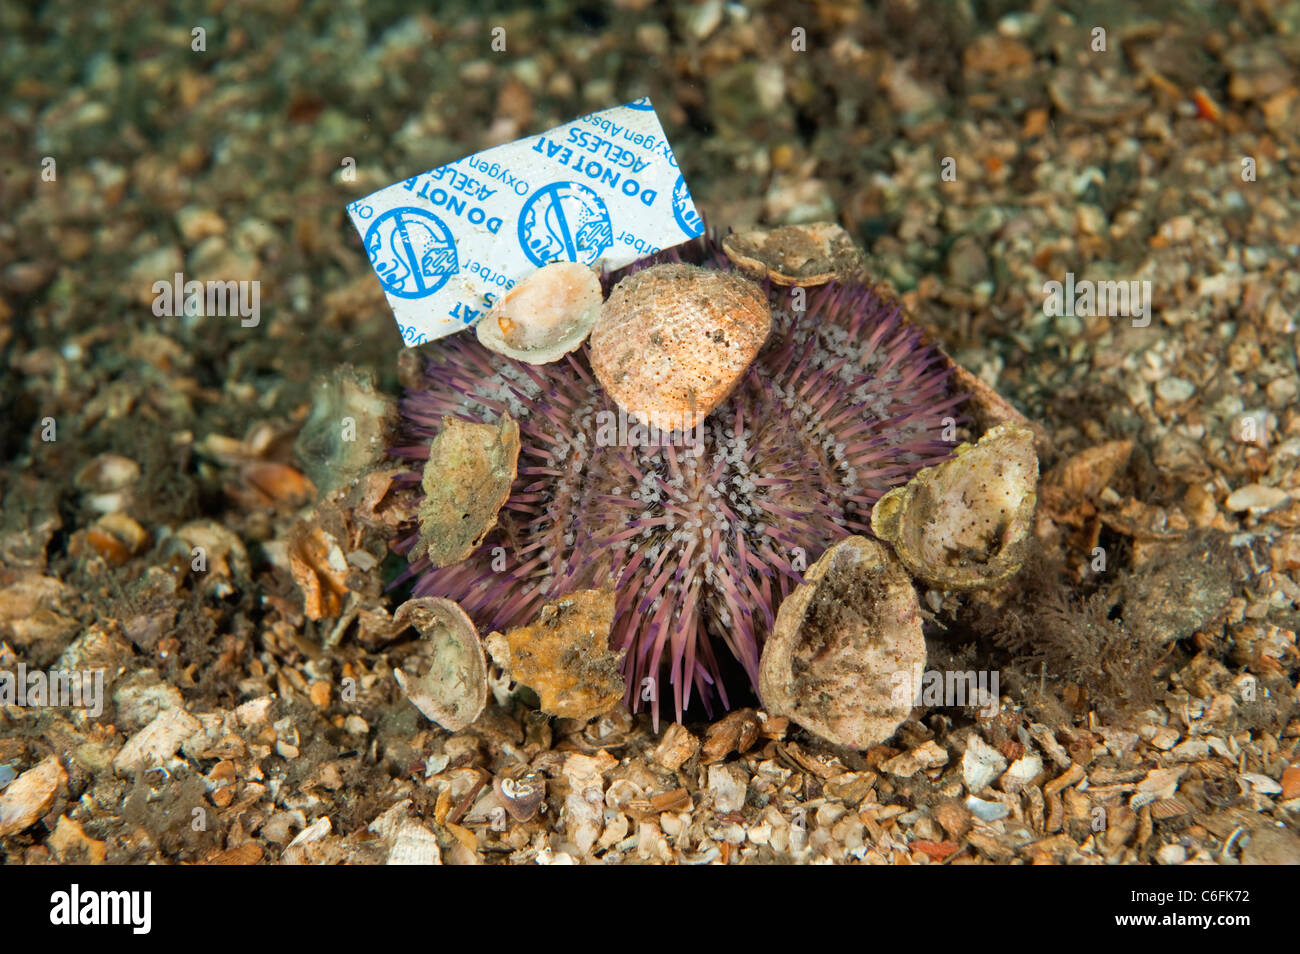 Sea Urchin, Lytechinus variegatus, with debris and garbage attached to it. Photographed in the Lake Worth Lagoon, Singer Island, Stock Photo